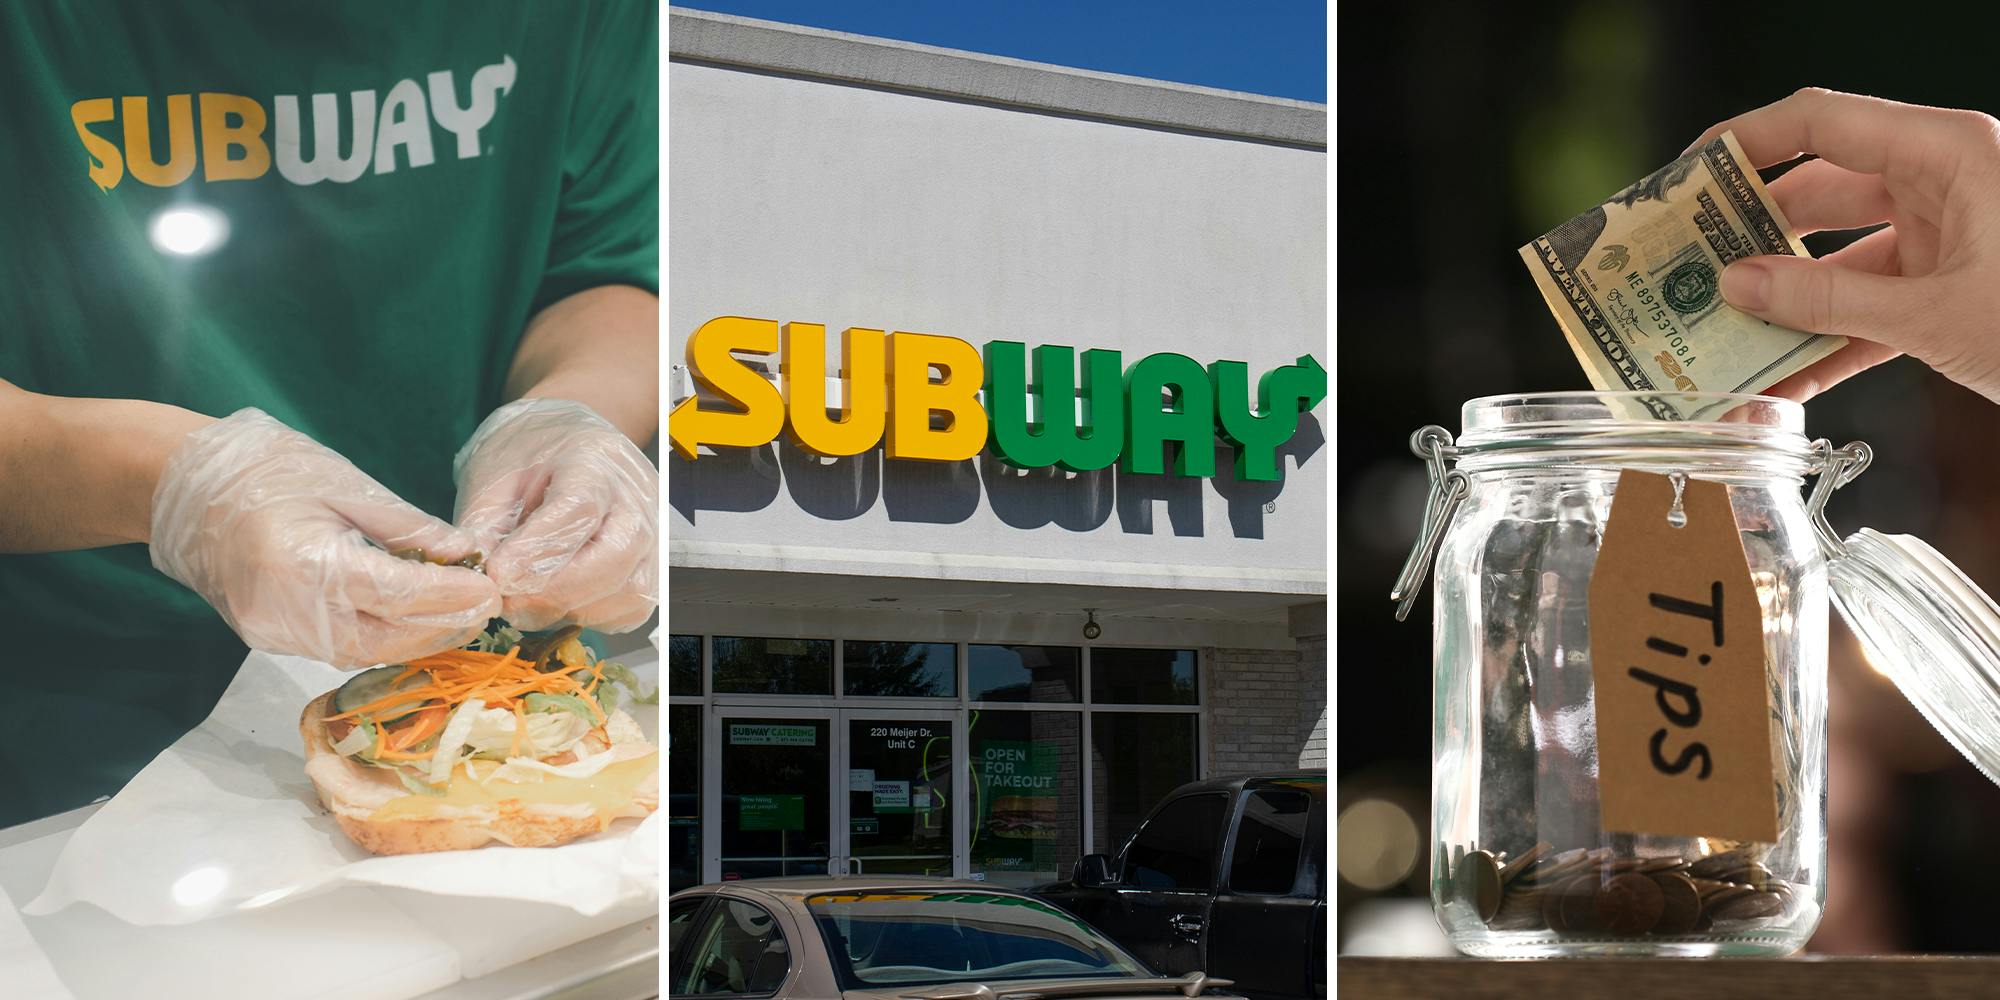 ‘The cashier scoffed at me’: Subway customer says worker gave him an attitude for not tipping on $3 bottle of Dasani